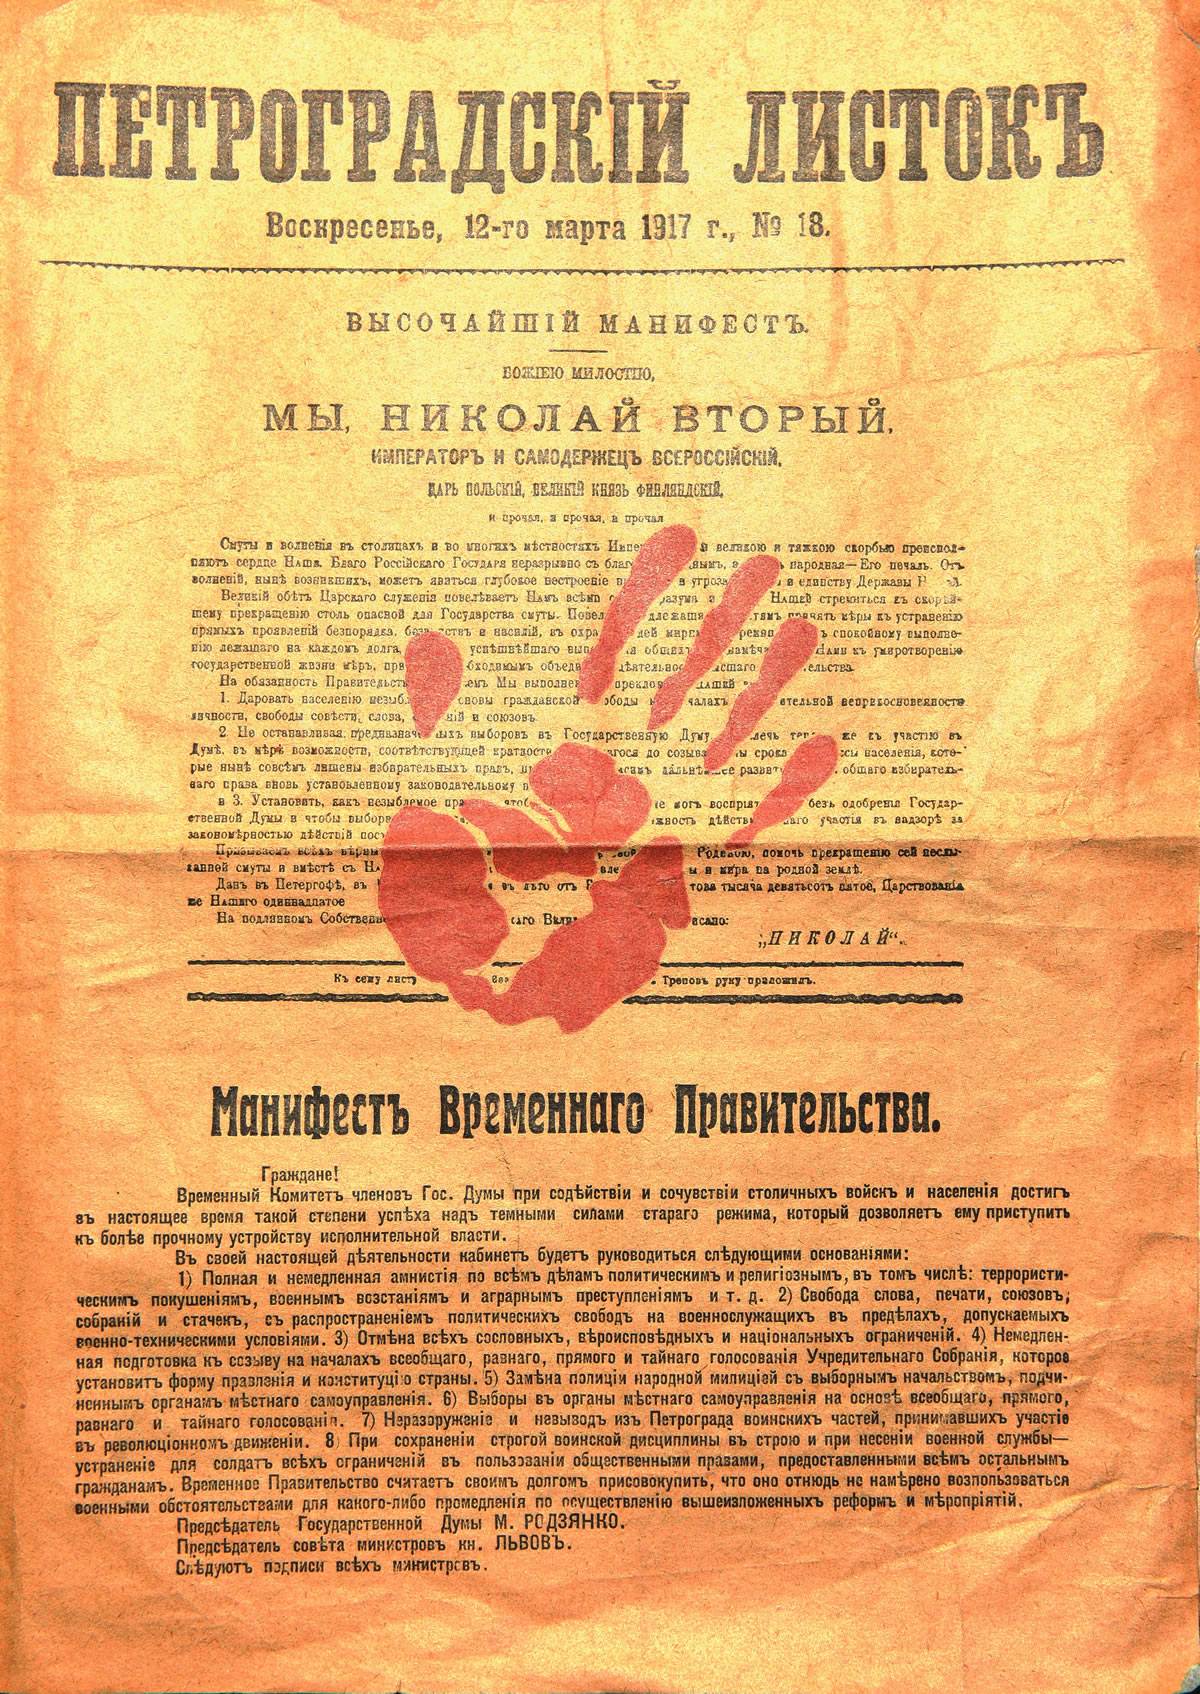 Petrogradskij Listok (The Sheet of Petrograd) in which the Manifesto of the Provisional Government of Russia, March 12, 1917 (The National Museum of History of Moldova)